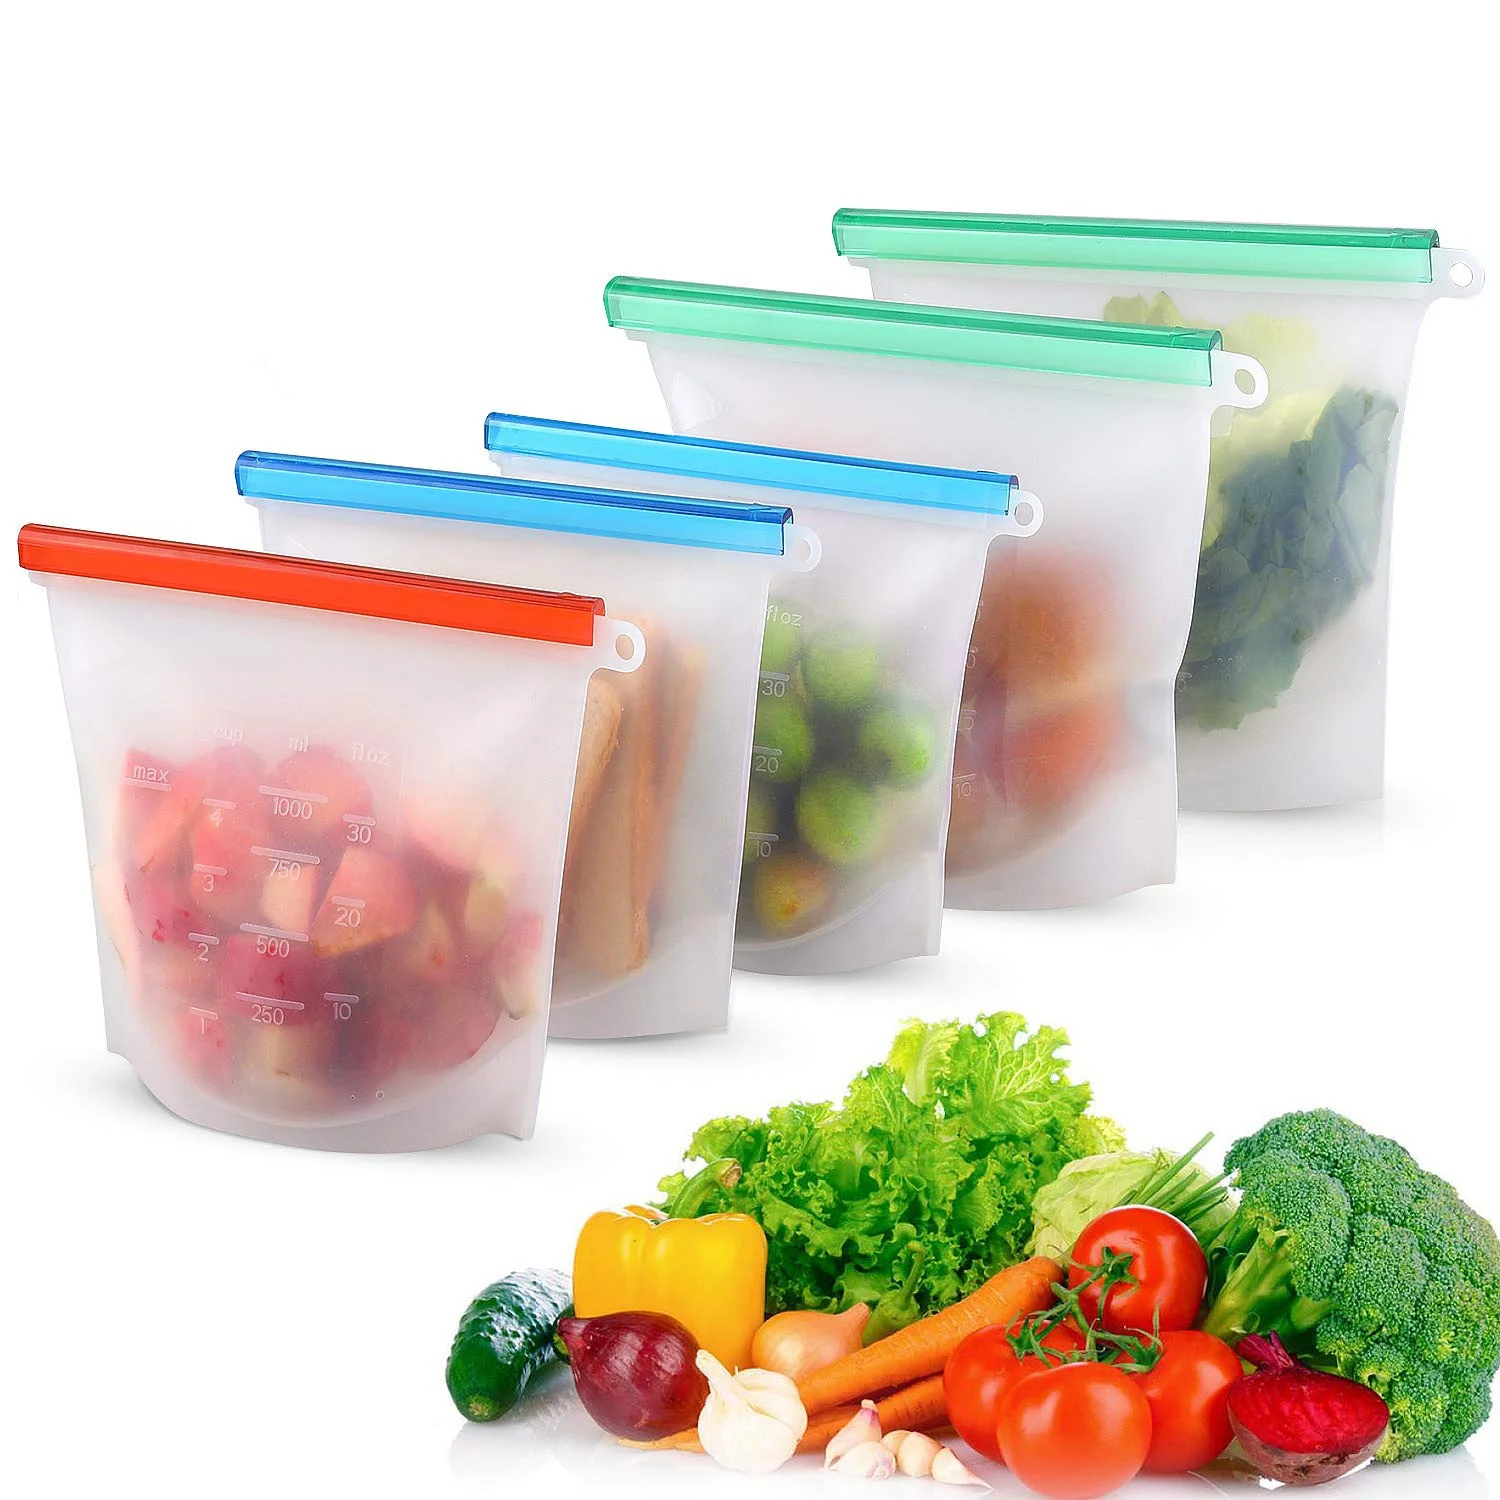 

500/1000/1500/ML Reusable Food Saver Sealer Bags Storage Leakproof Ziplock Silicone Bag for Food Fruits Bolsas De Silicona, White, red, blue, green, customized